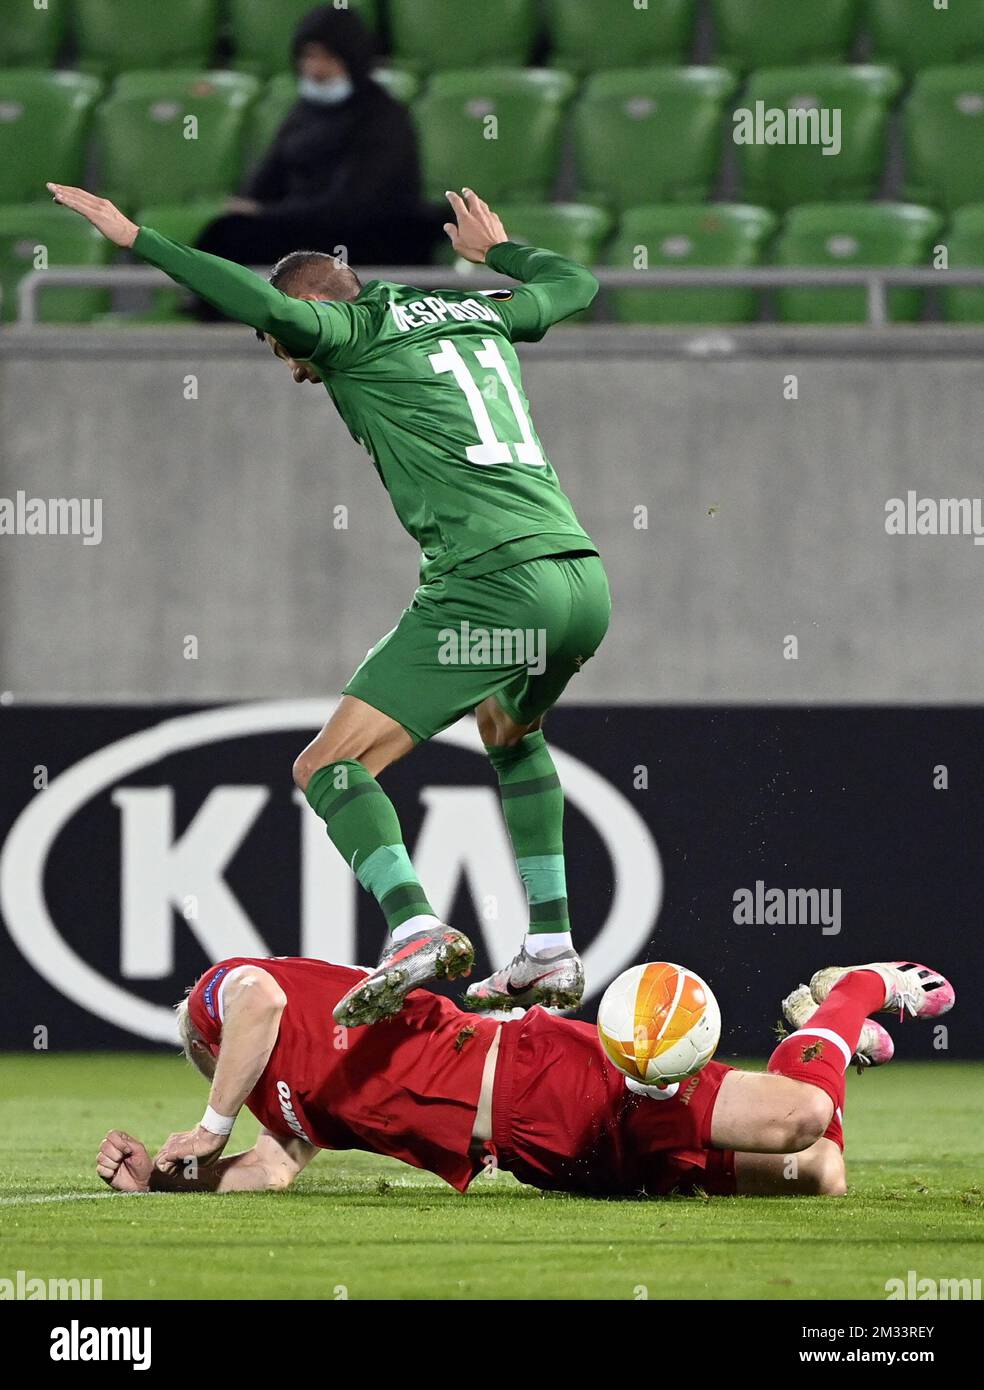 Ludogorets' Kiril Despodov and Antwerp's Simen Juklerod pictured during a soccer match between Bulgarian club PFK Ludogorets and Belgian team Royal Antwerp FC, Thursday 22 October 2020, in Razgrad, Bulgaria, on the first day of the group phase (group J) of the UEFA Europa League competition. BELGA PHOTO DIRK WAEM Stock Photo